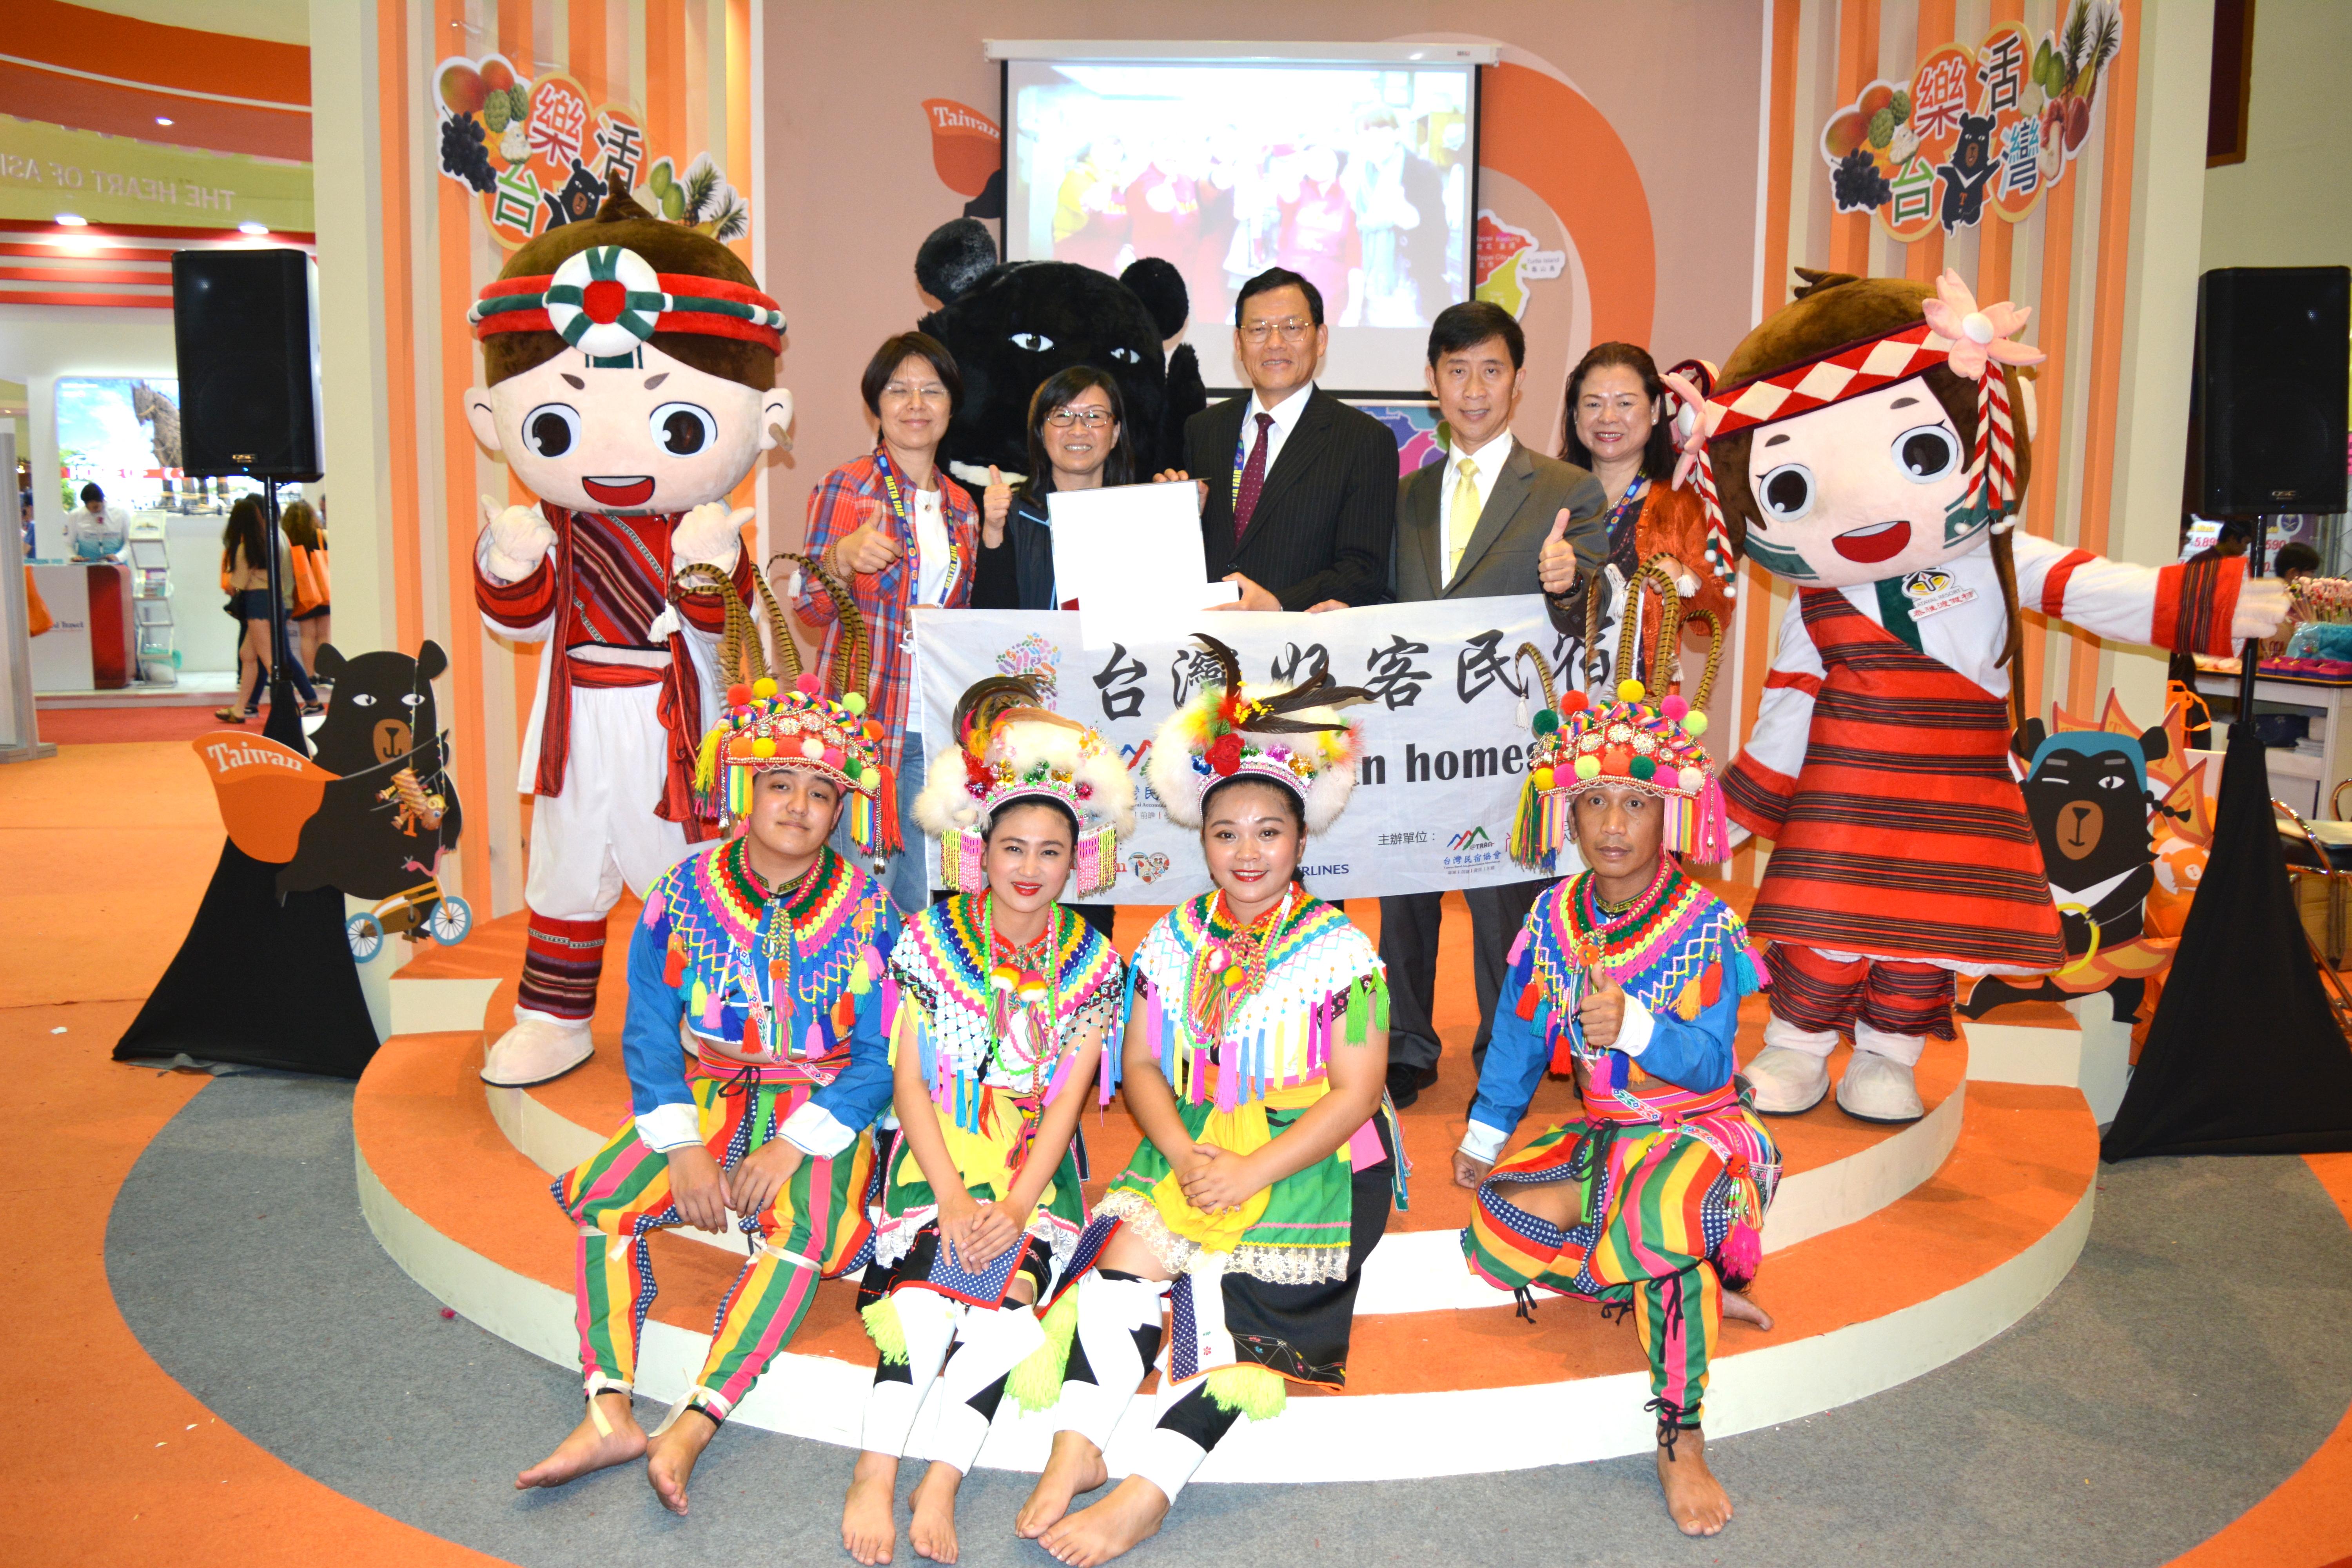 Representatives from Taiwan Rural Accommodation Association presented souvenirs to Representatives Mr Chang, James Chi-ping (third from left, back row), and Director of Taiwan Tourism Bureau KL Office Mr Tony Wu (fourth from left, back row) take a group photo.